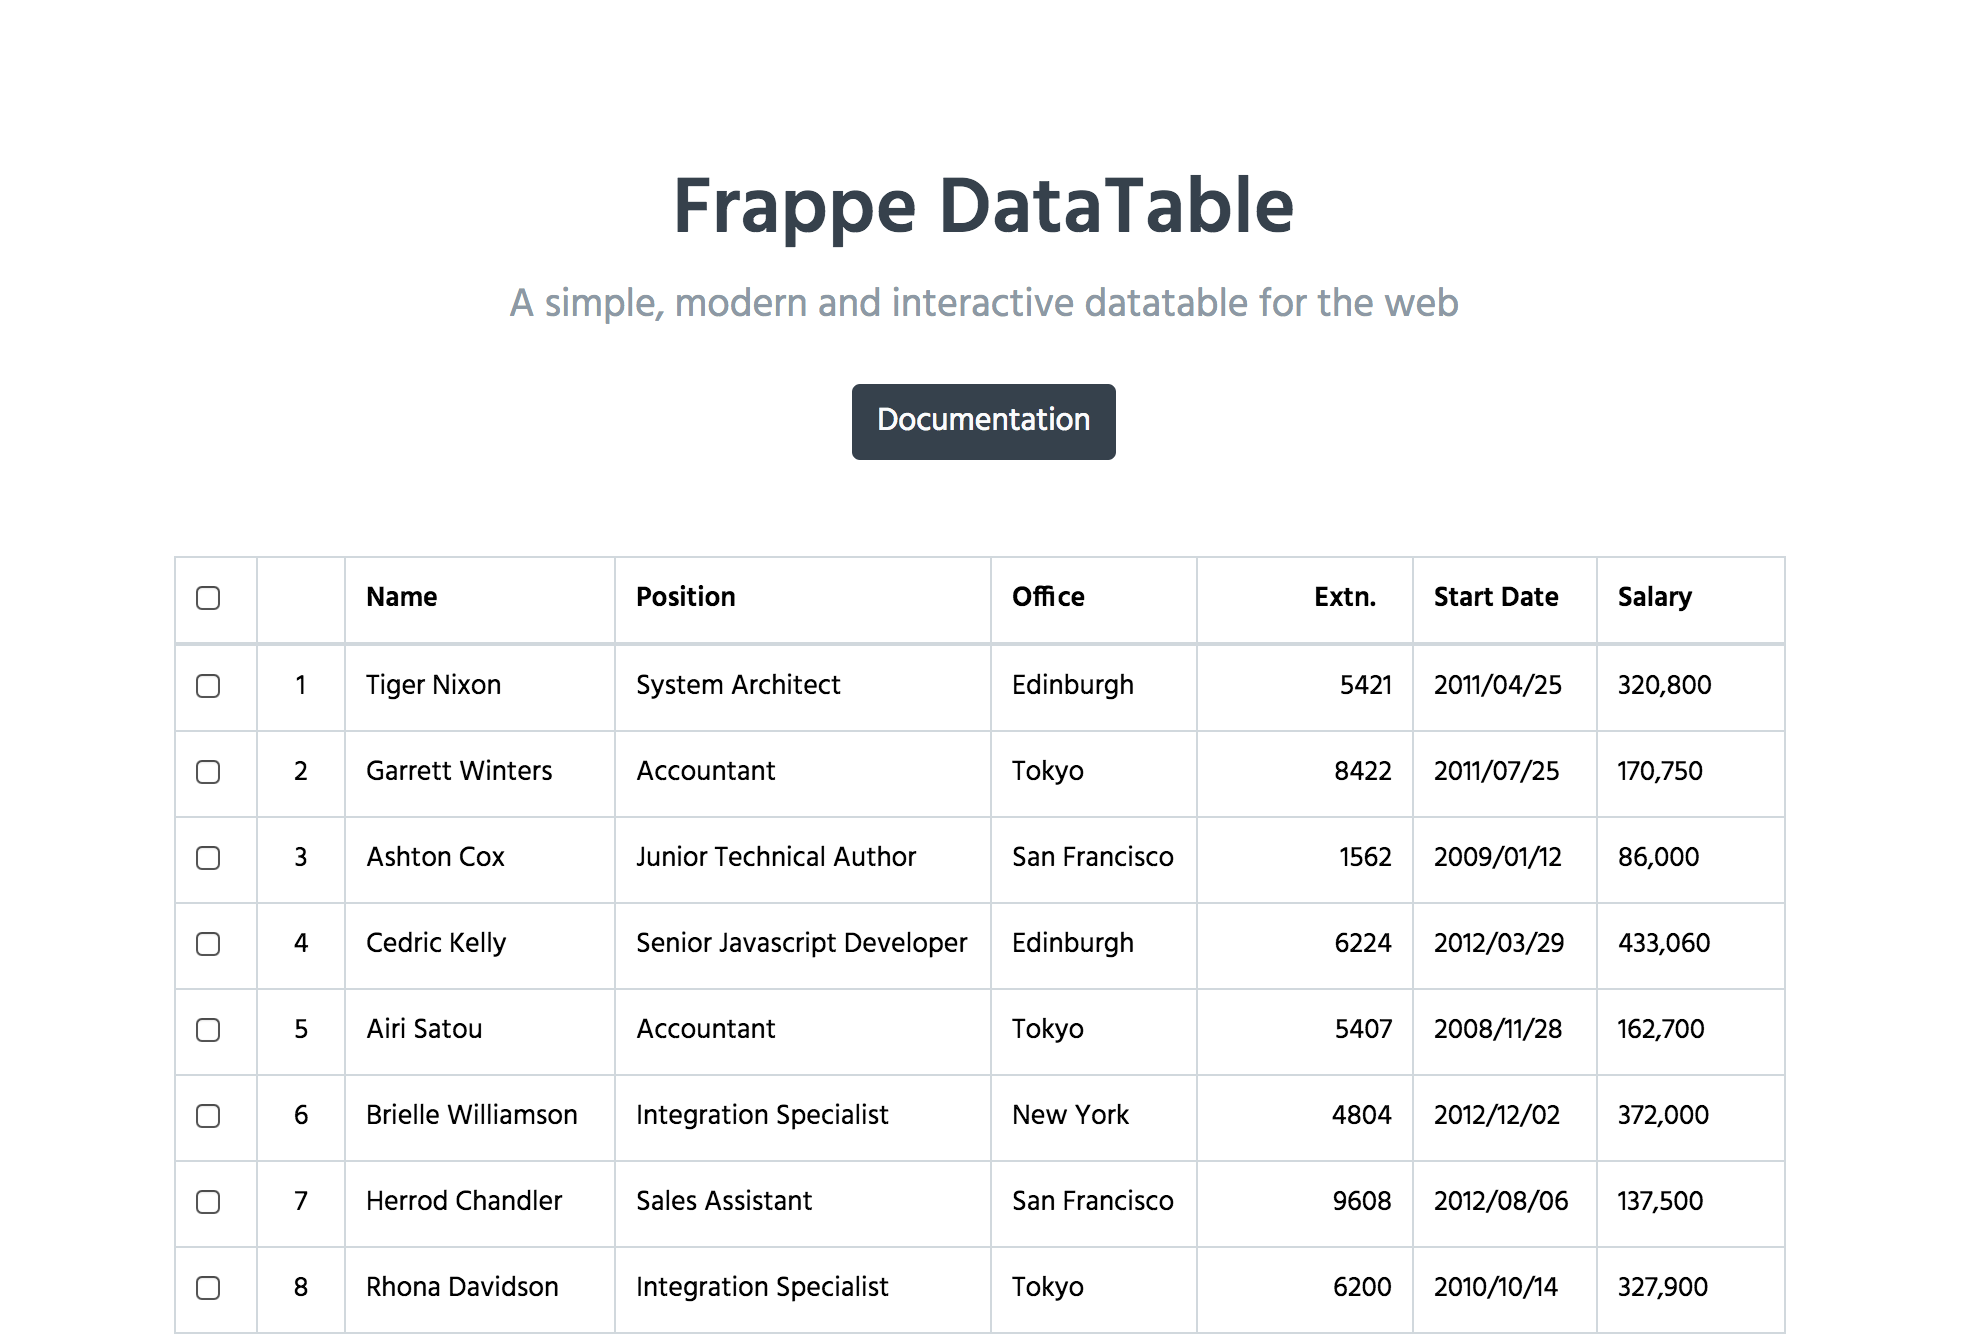 Making a new datatable for the web - Frappé Thoughts - Medium